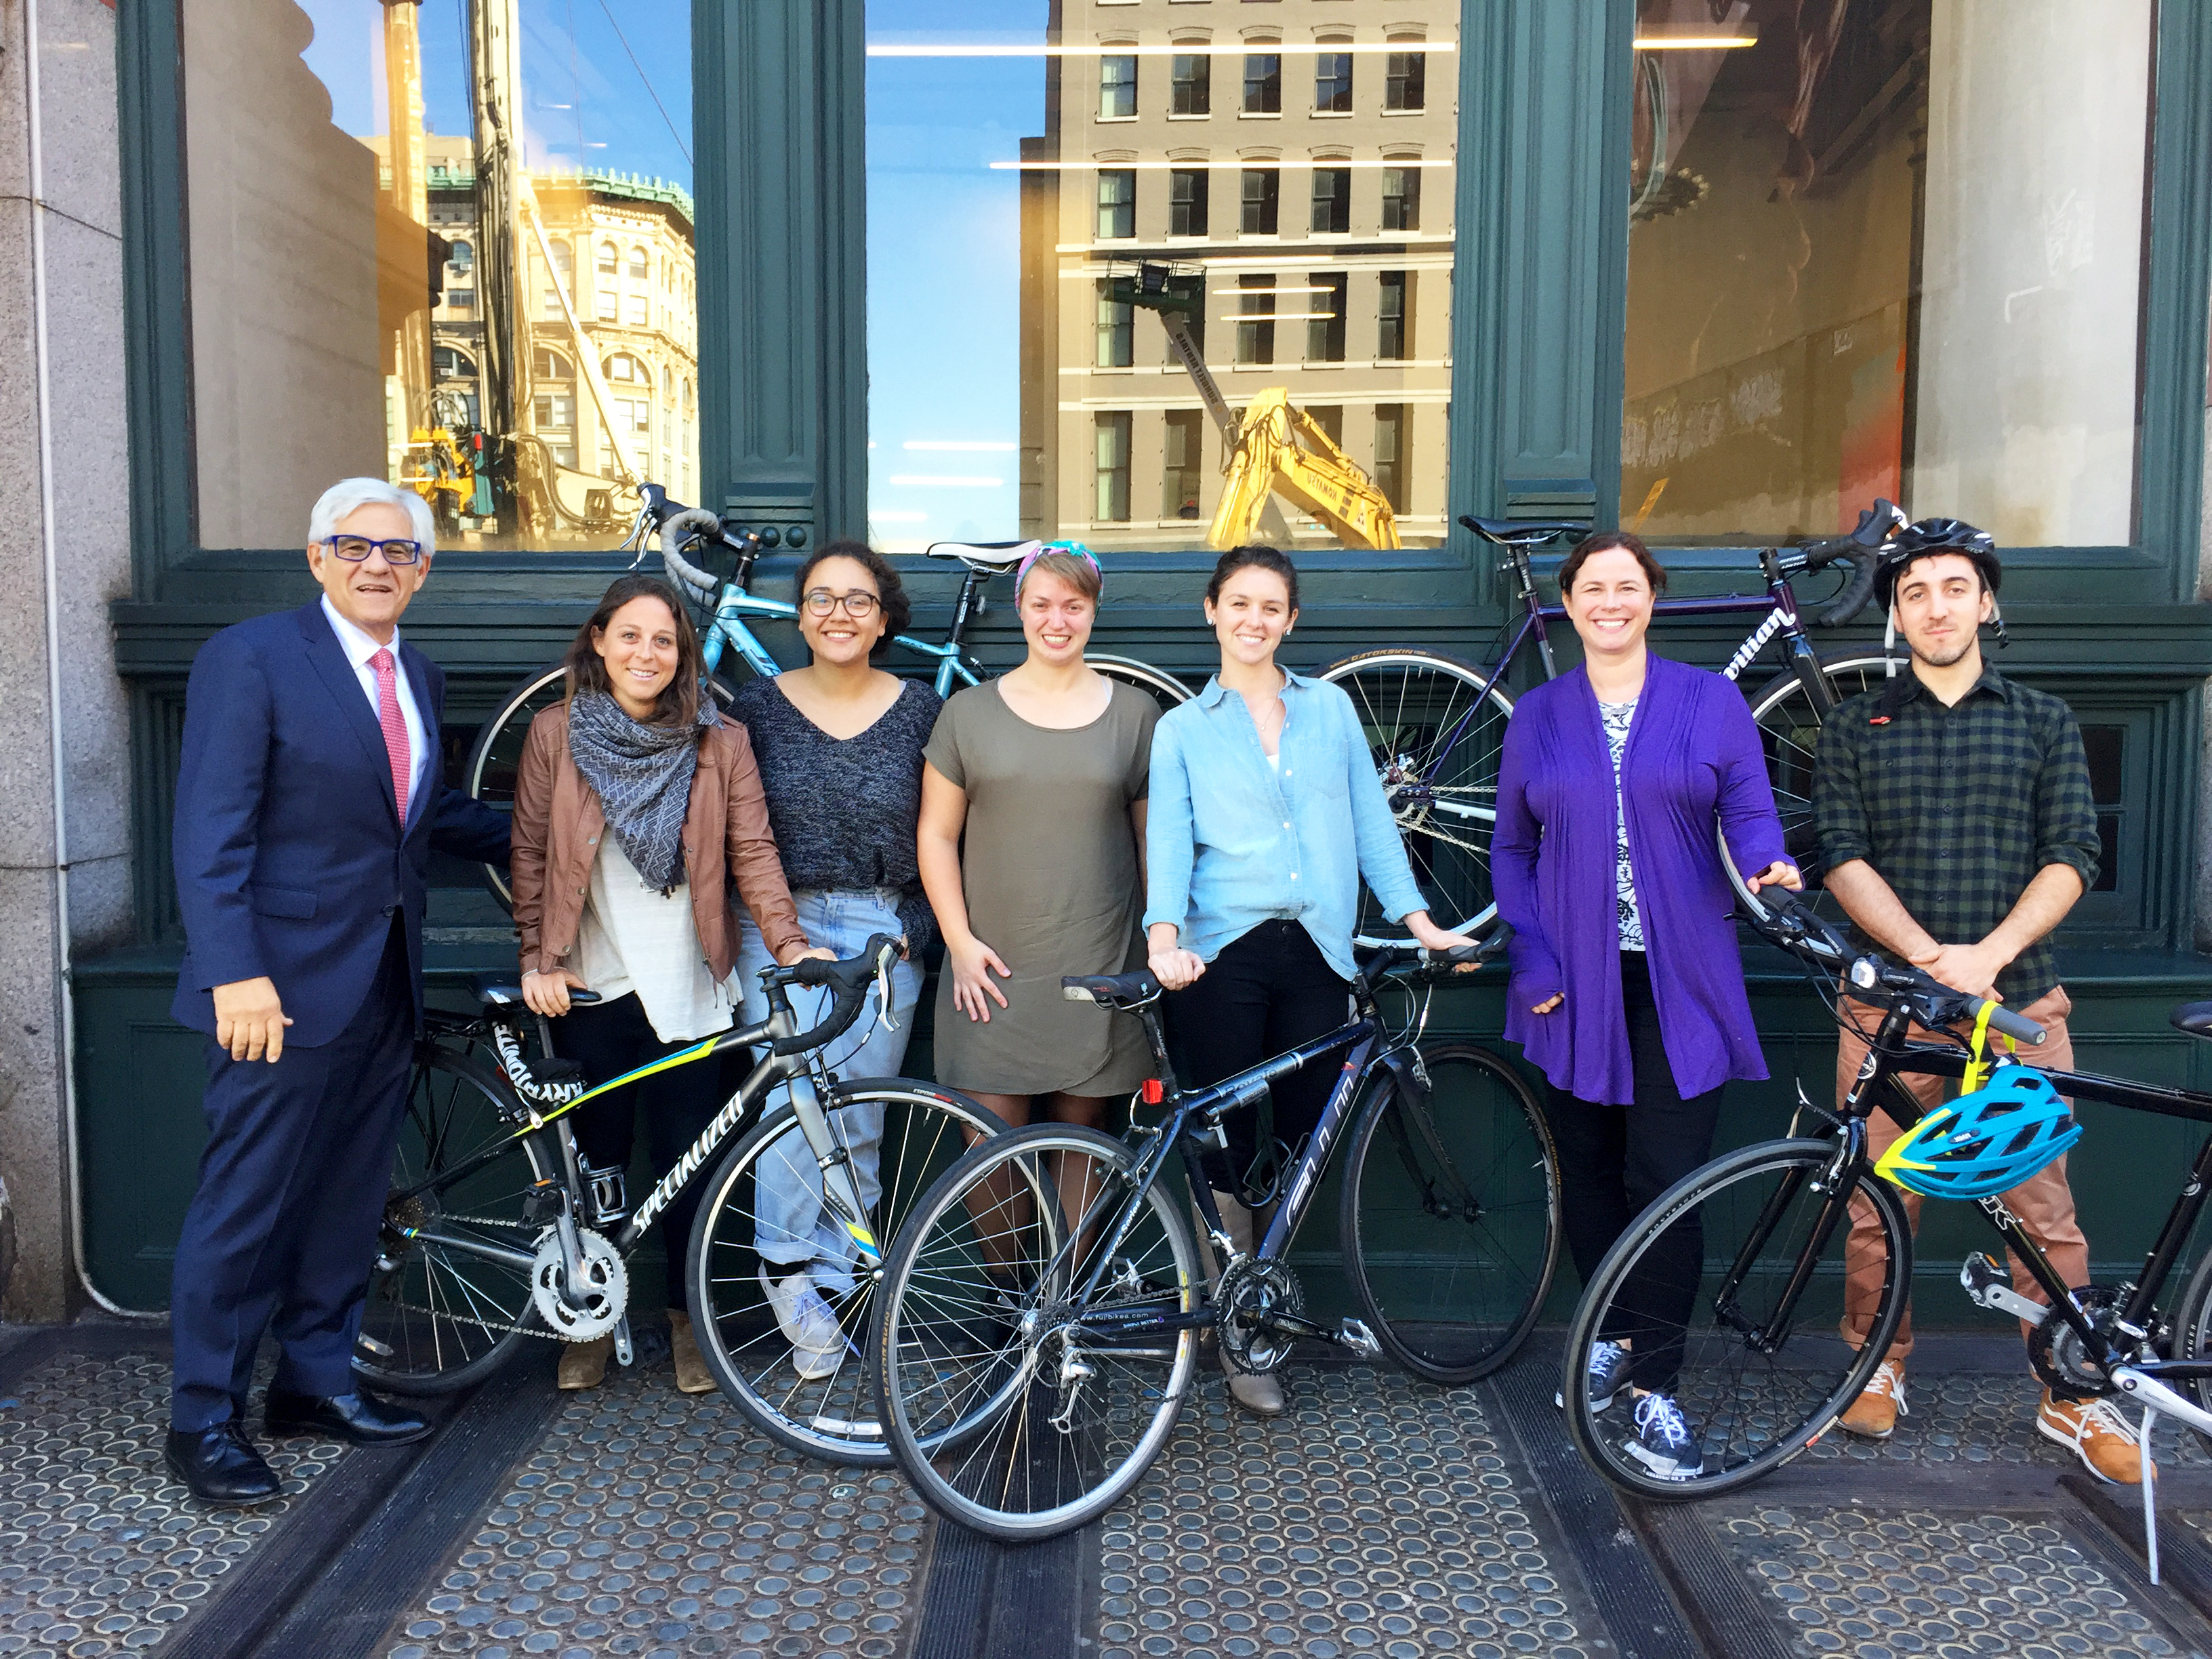 The Cyclists (from left to right): Mitchell Moss, Director, NYU Rudin Center; Joanna Simon, Graduate Researcher; Olivia Craighead, Program Assistant; Ashley Smith, Graduate Researcher; Jenny O’Connell, Graduate Researcher; Sarah Kaufman, Assistant Director; Ari Kaputkin, Graduate Researcher.